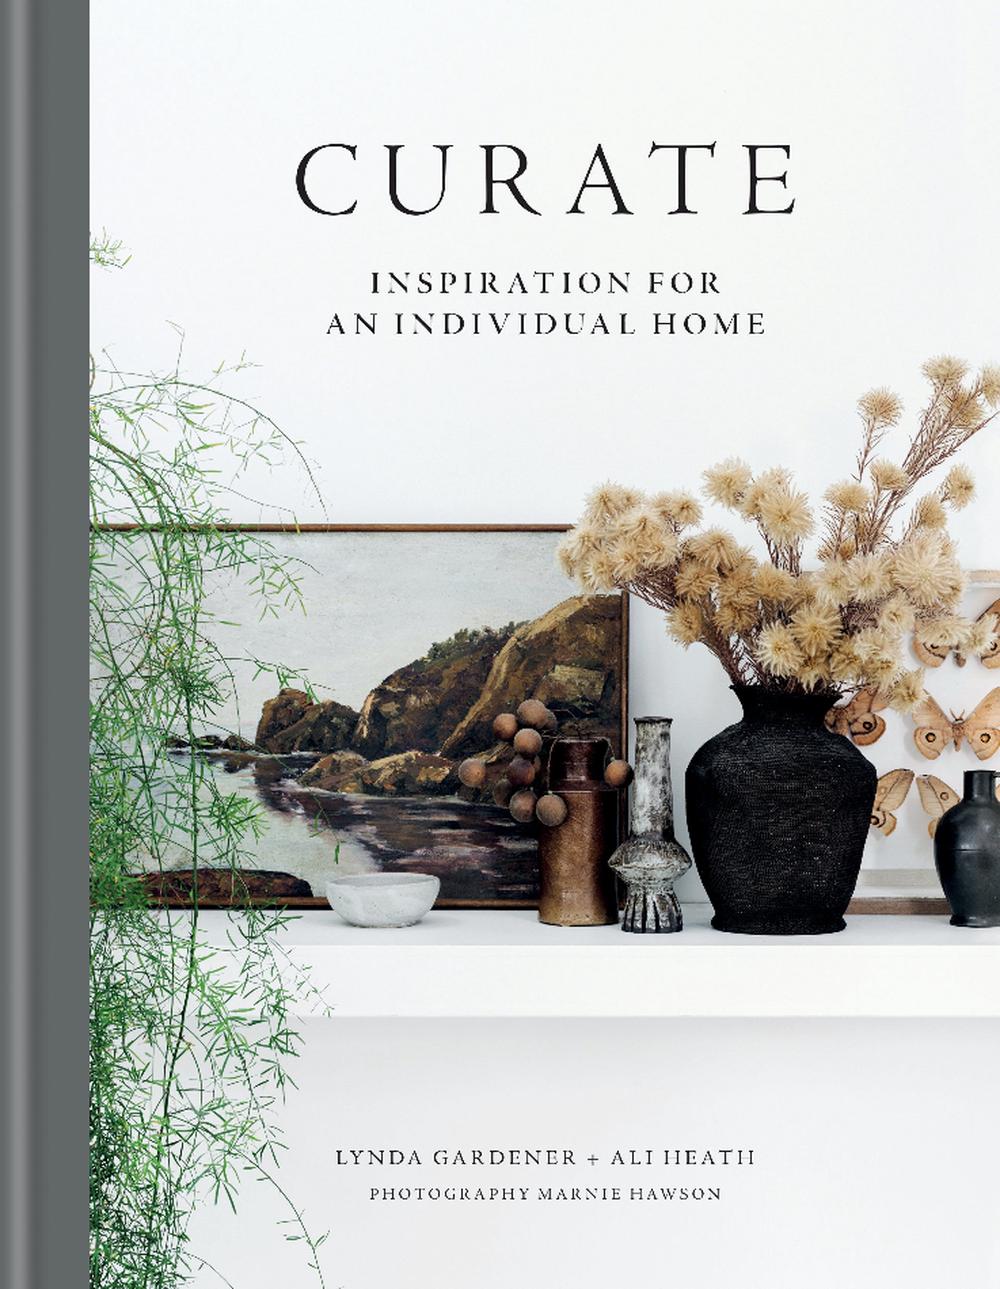 Curate ~ Inspiration for an Individual Home